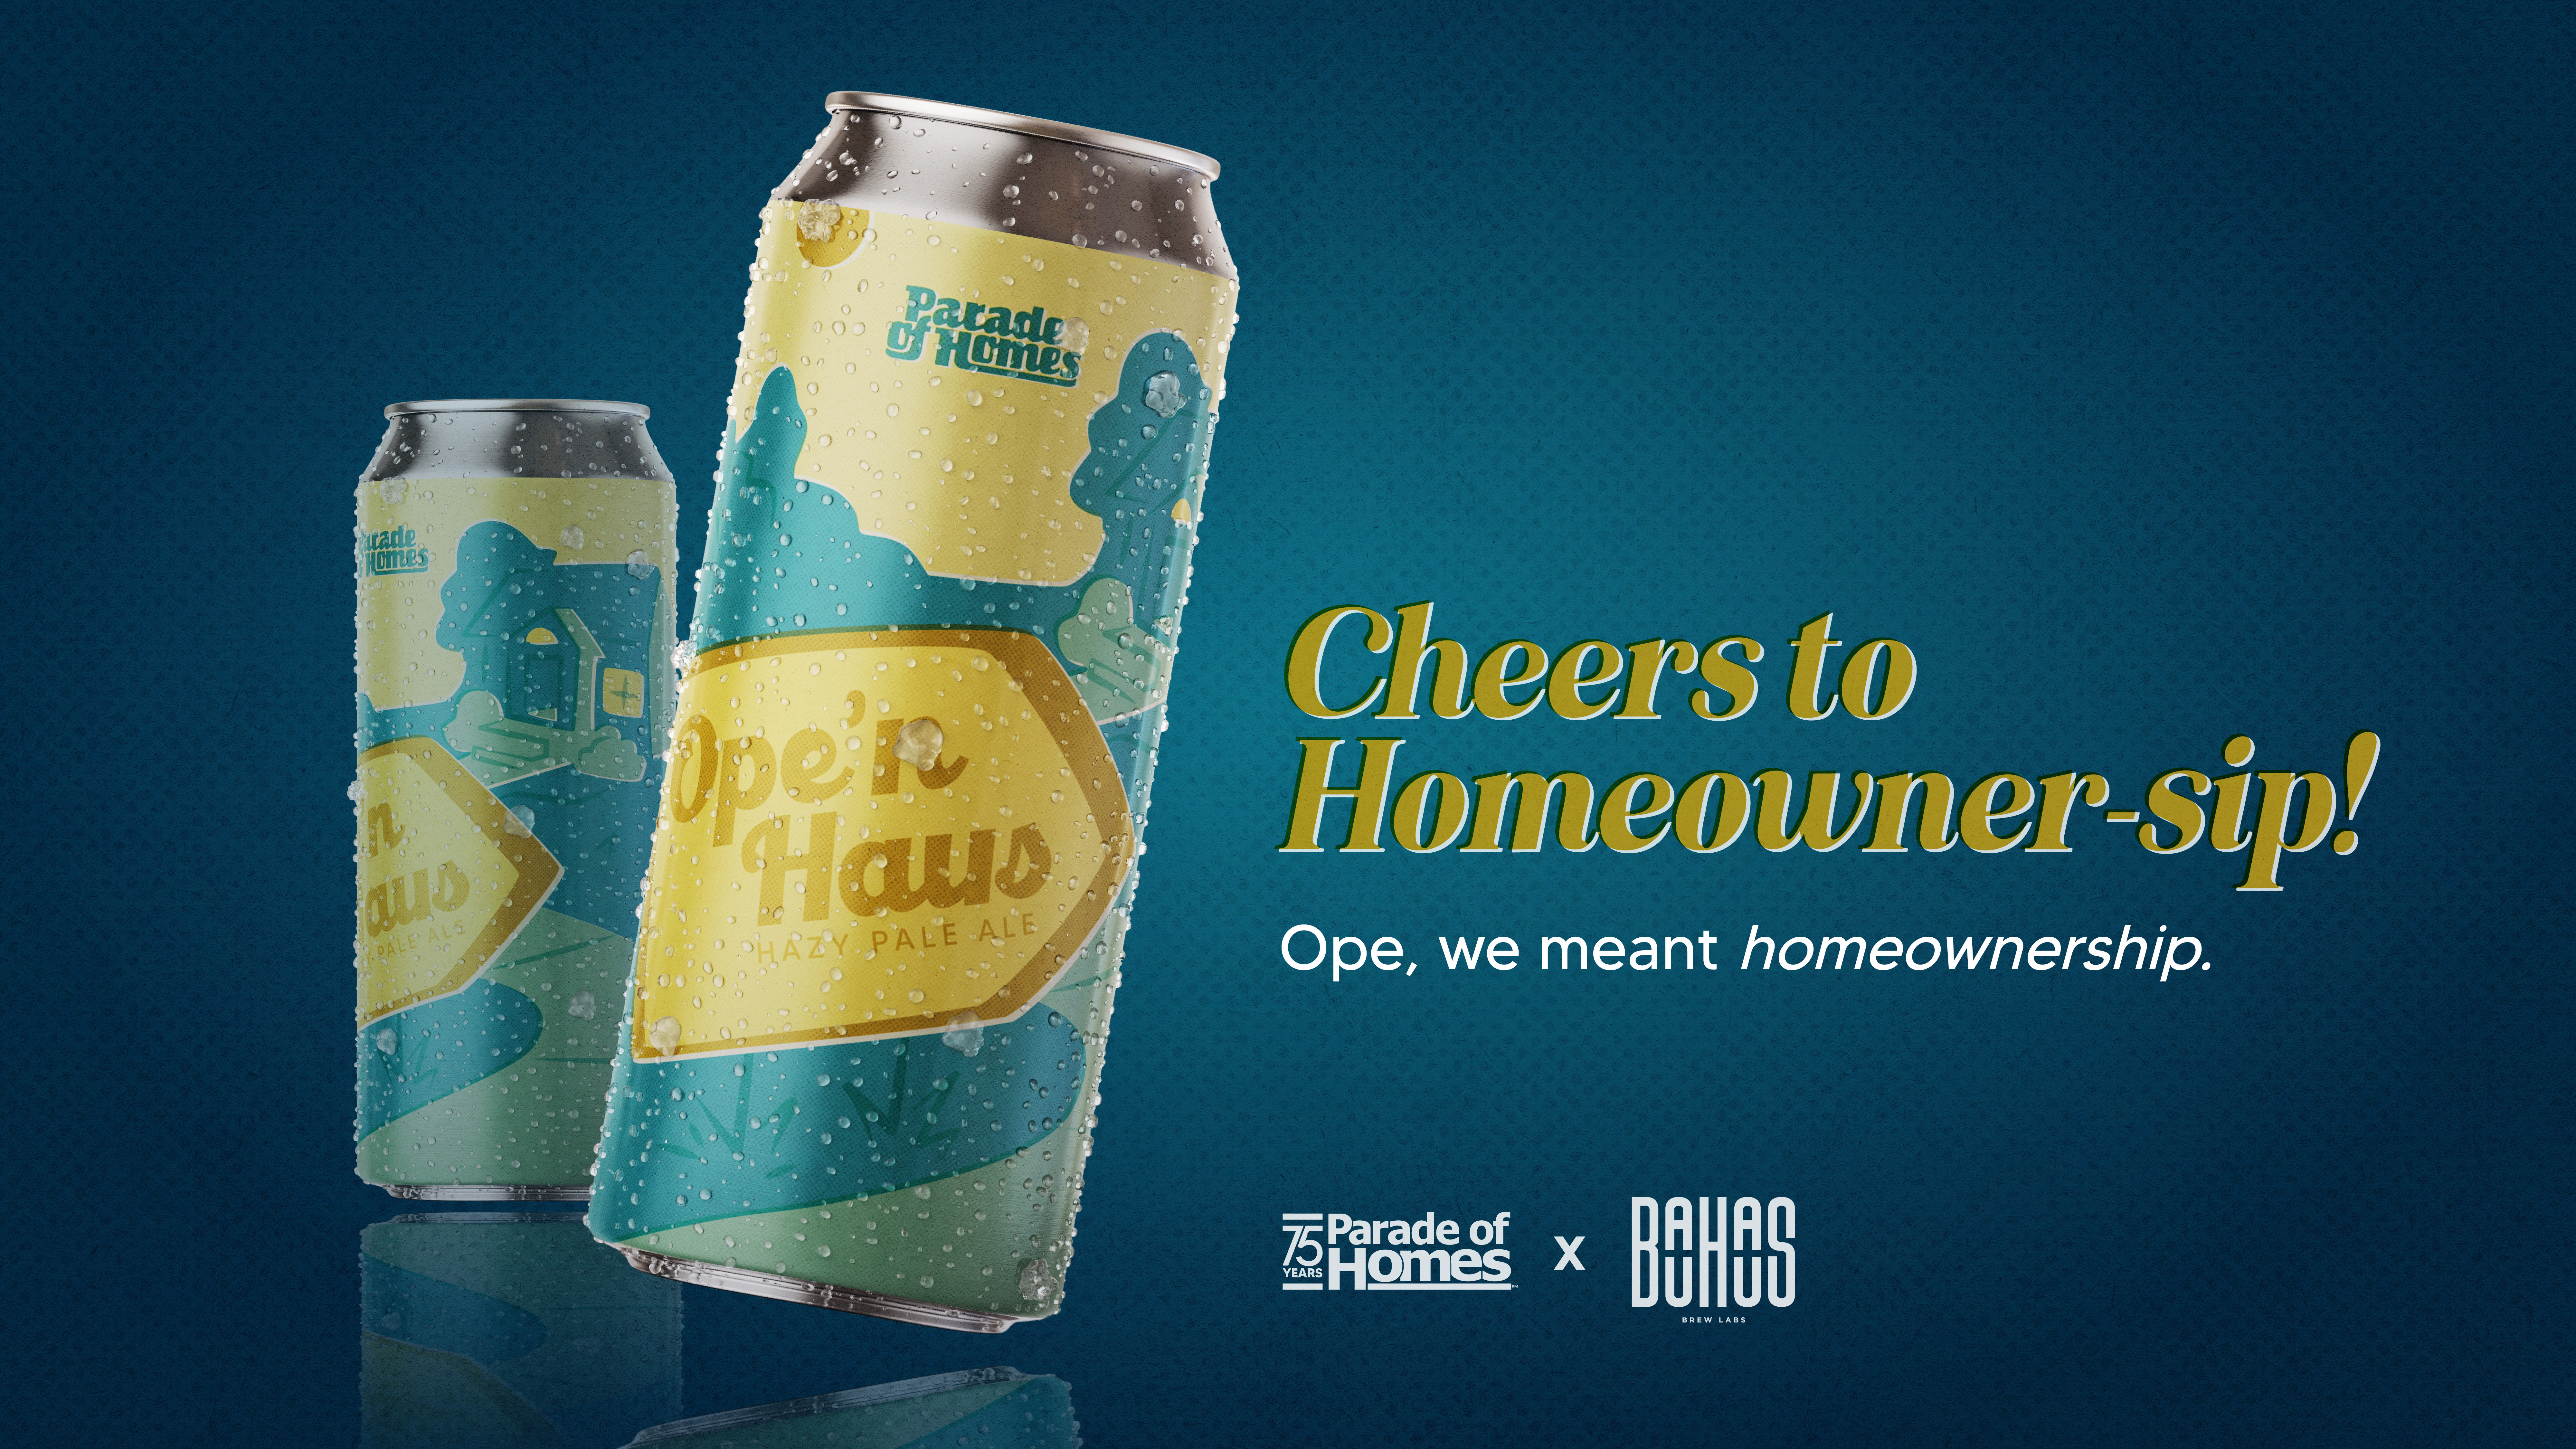 Image for Parade of Homes partners with Bauhaus Brew Labs to craft 75th anniversary beer